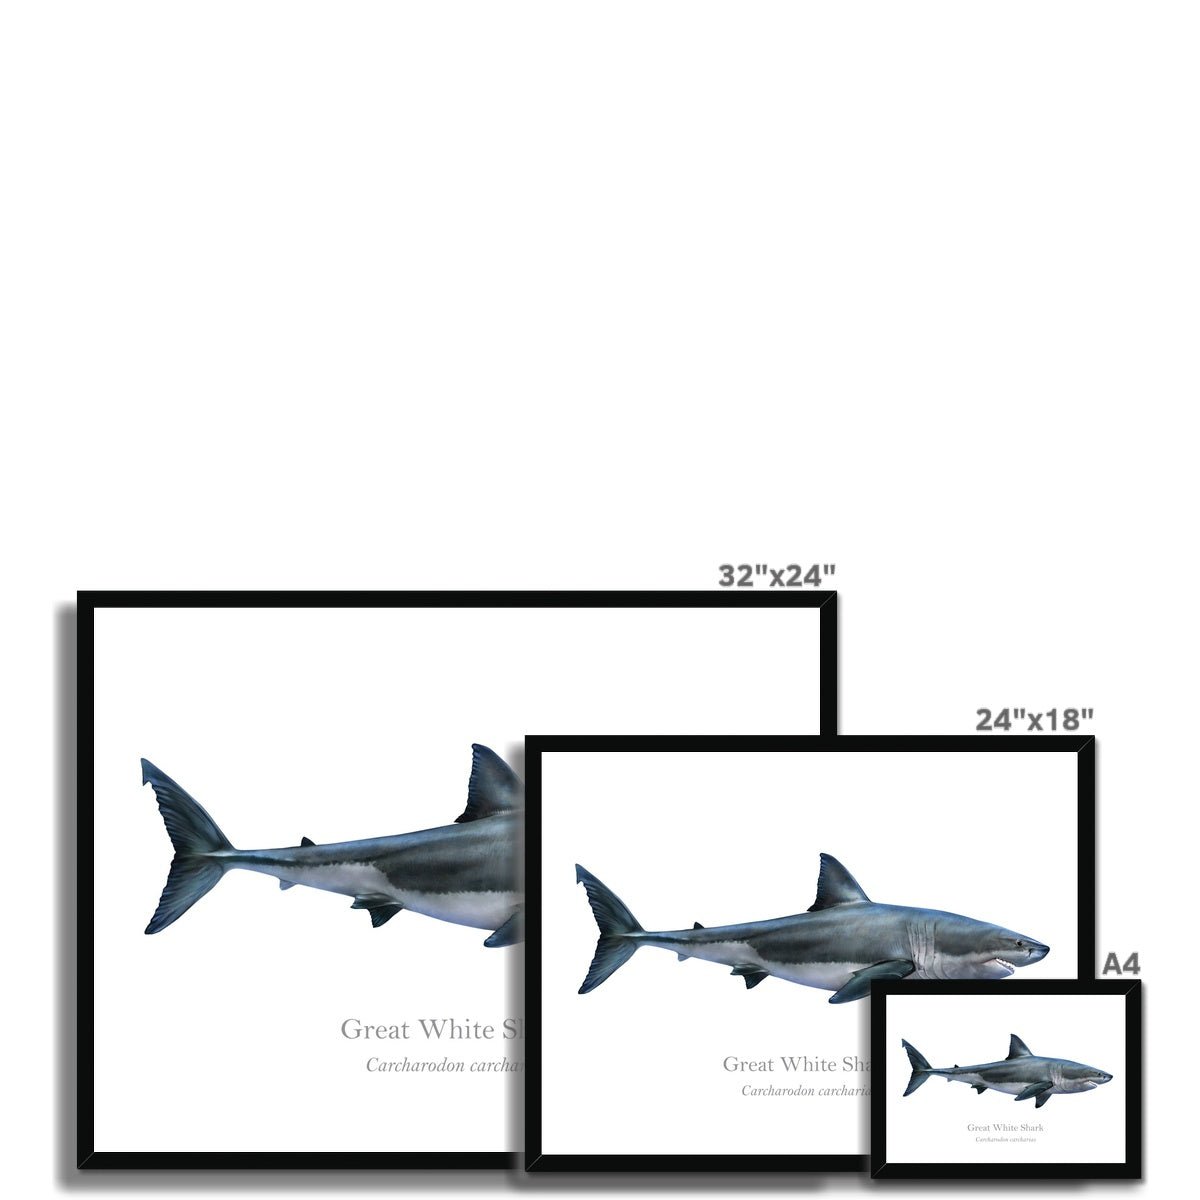 Great White Shark - Framed Print - With Scientific Name - madfishlab.com